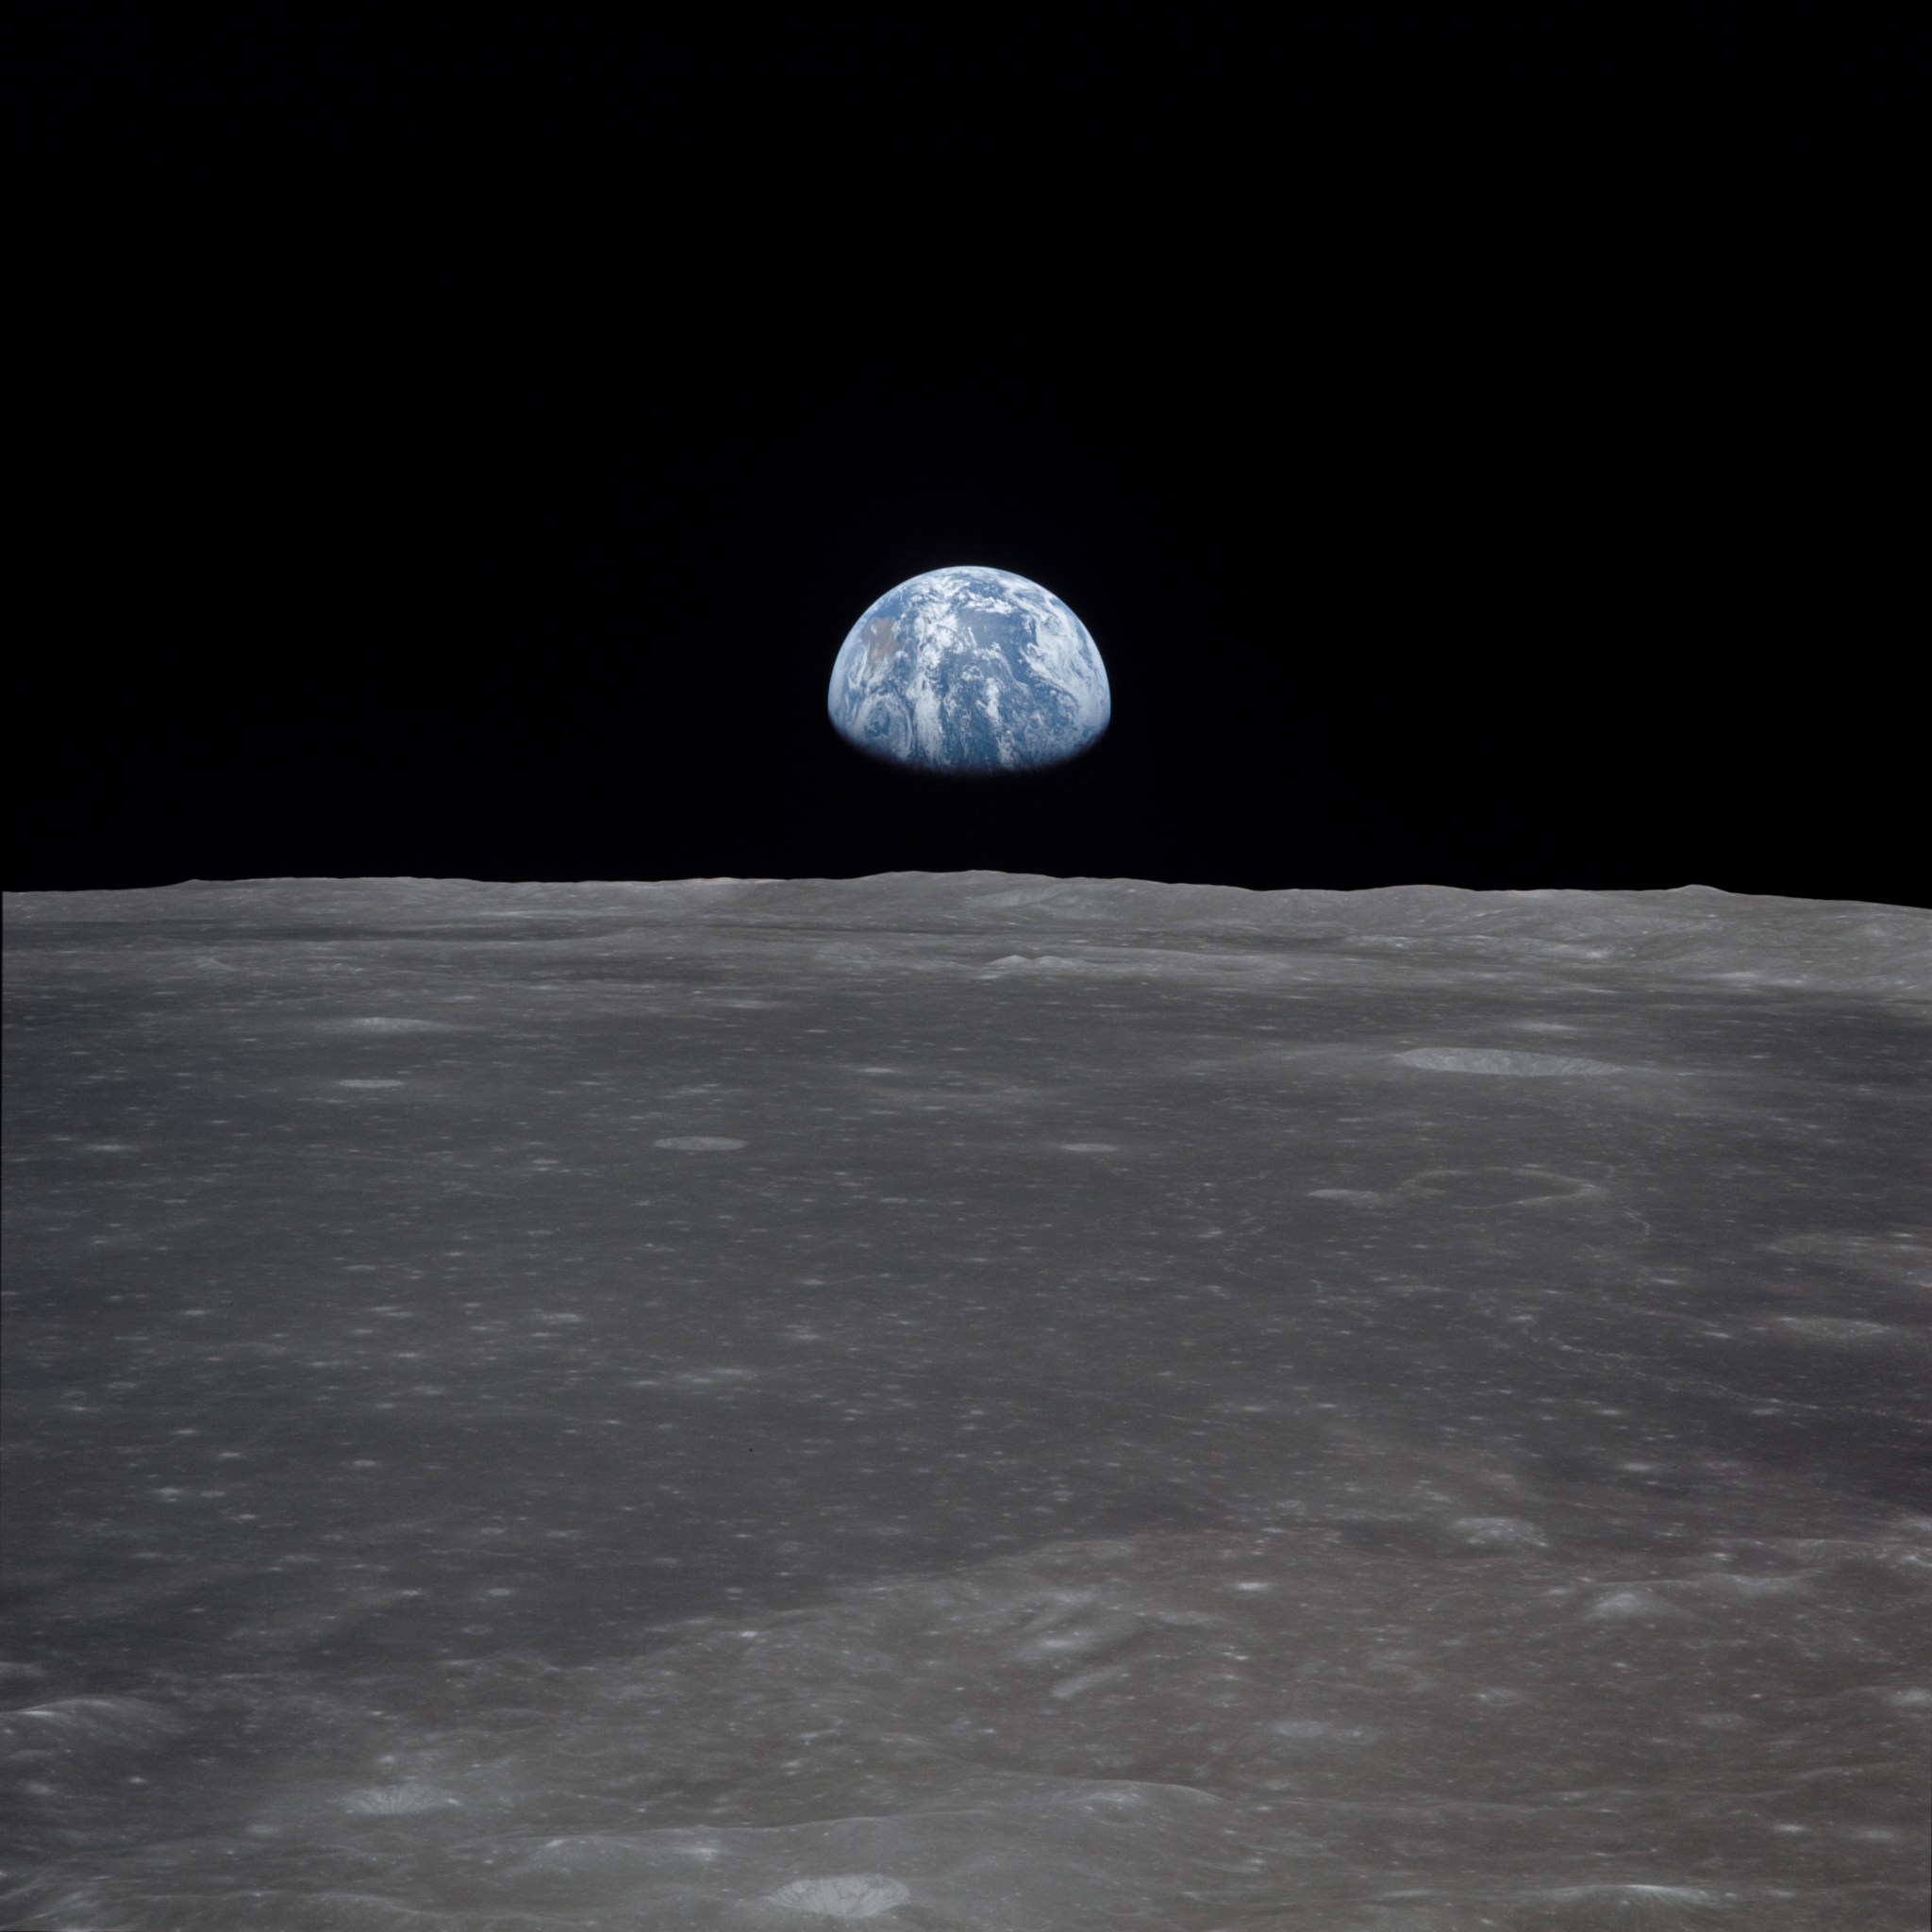 Apollo 11 Mission Image - View of Moon Limb, with Earth on the Horizon